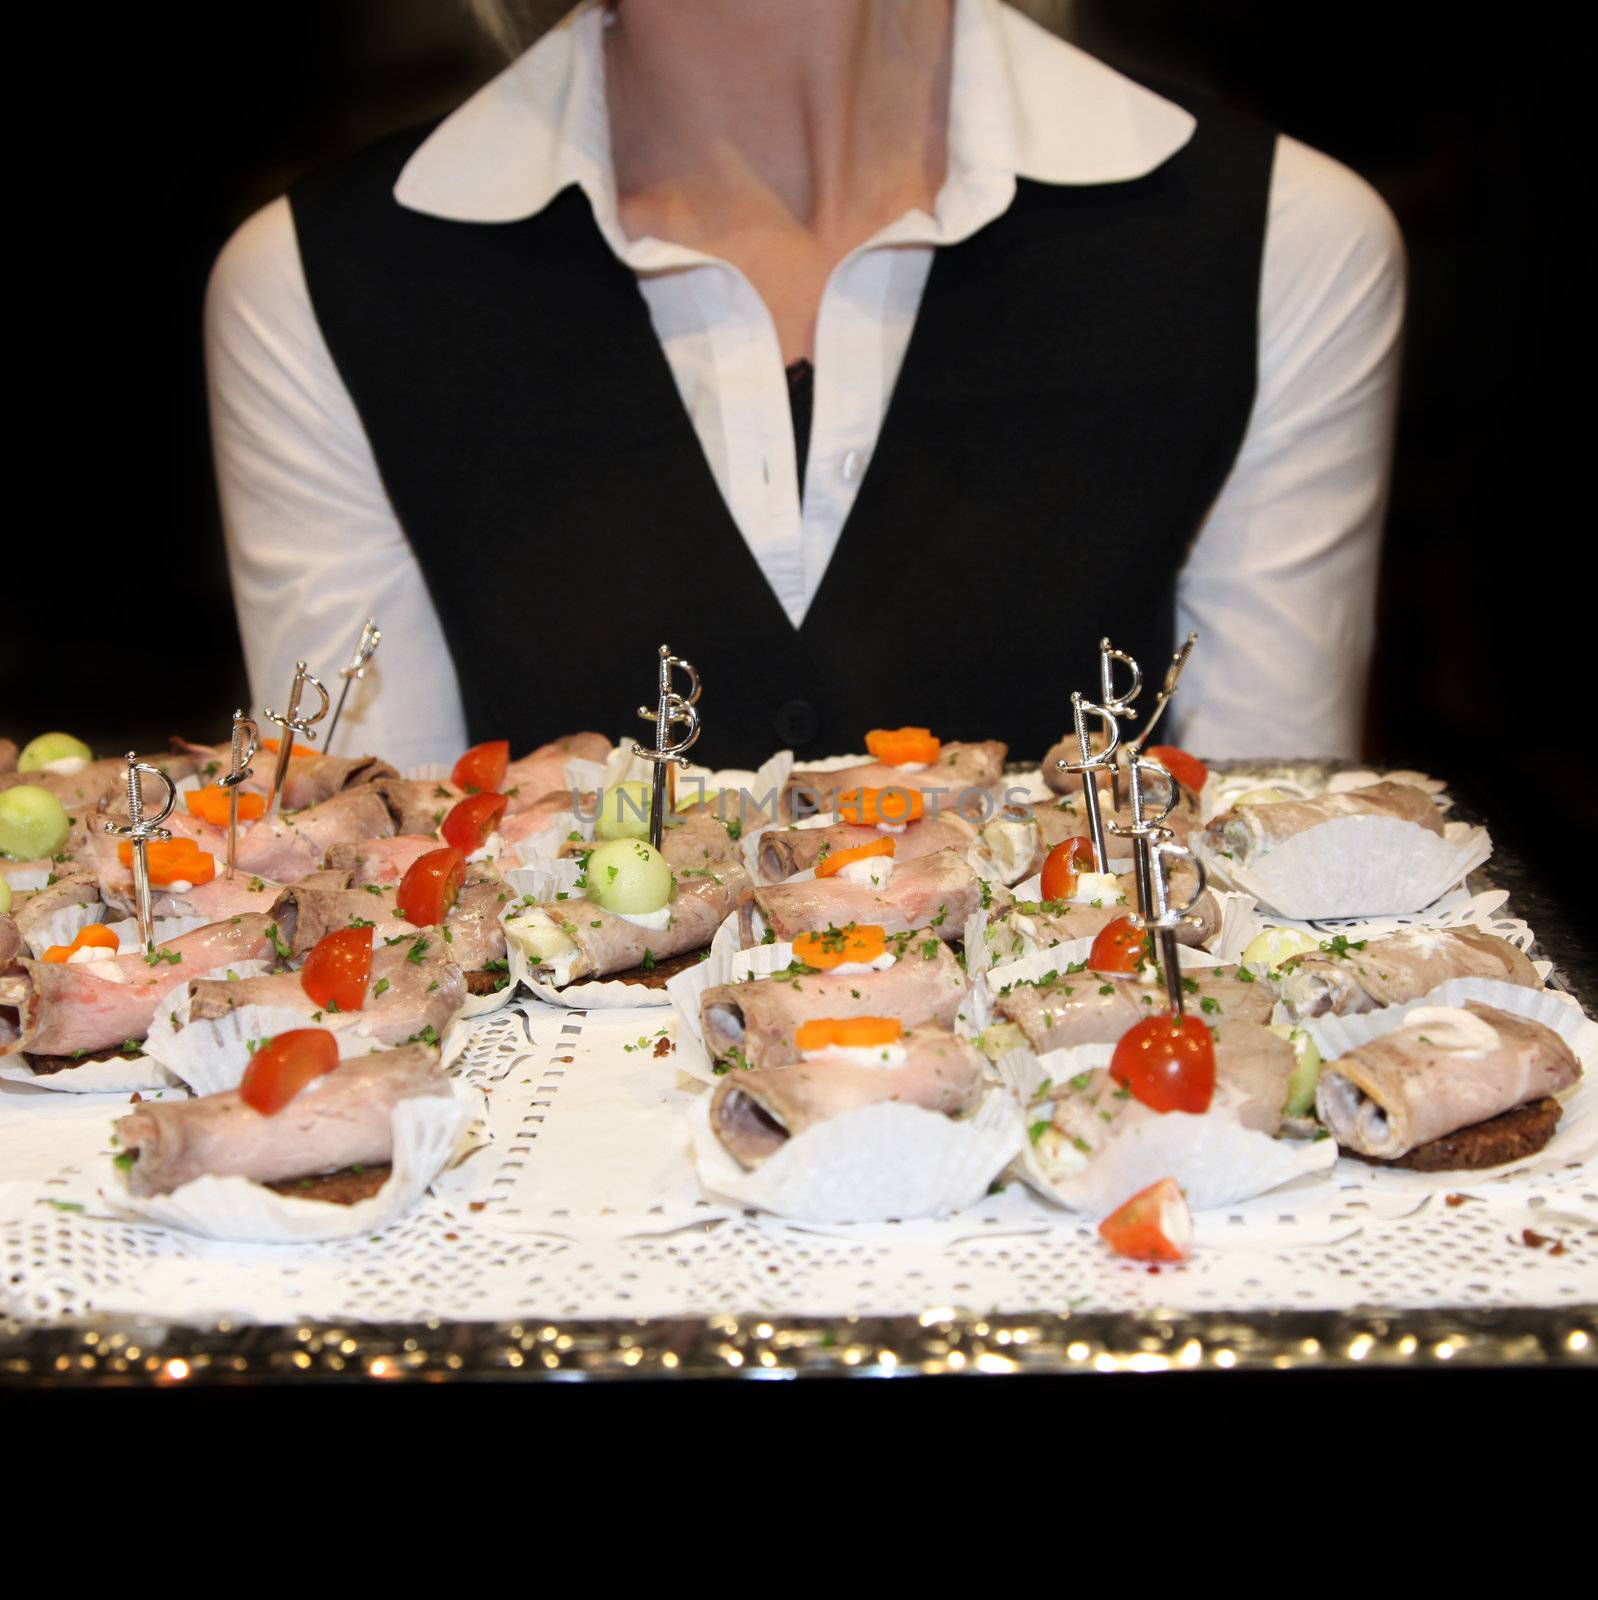 Waitress serving finger food. In the foreground, the tray can be seen with the appetizers. - Textile-square